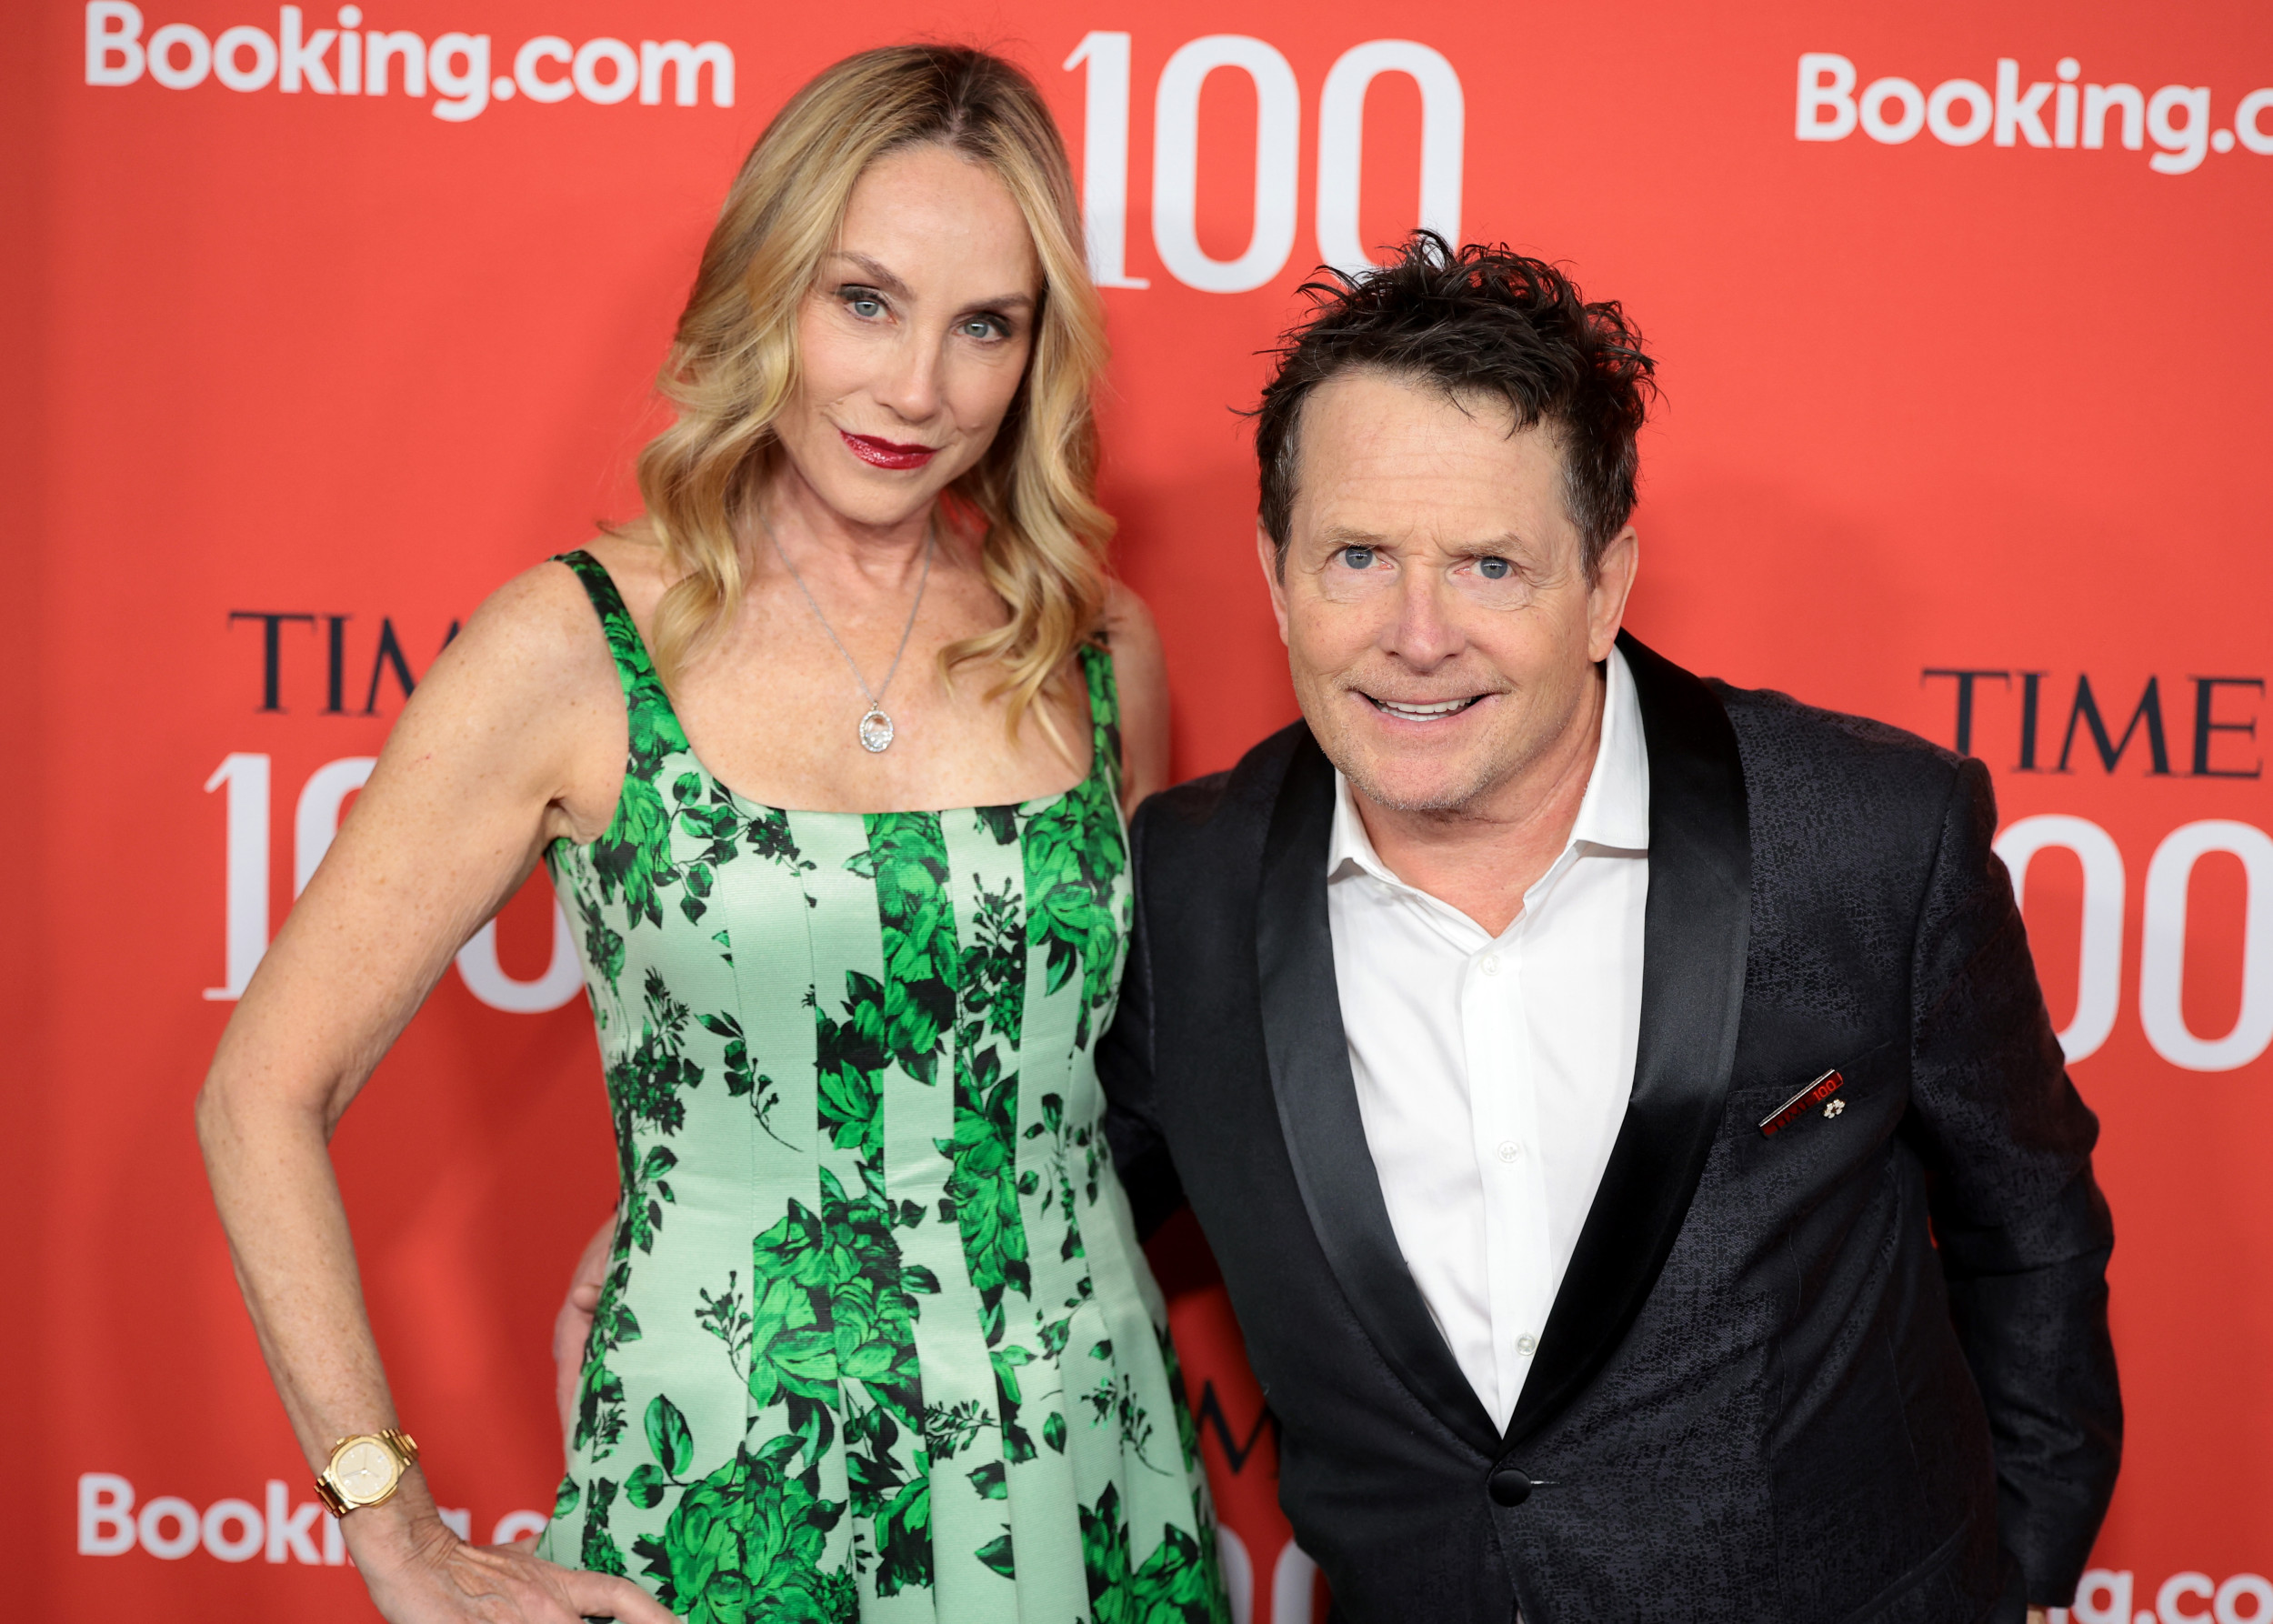 Michael J. Fox celebrates “a life full of love” in a throwback photo with his wife Tracy Pollan